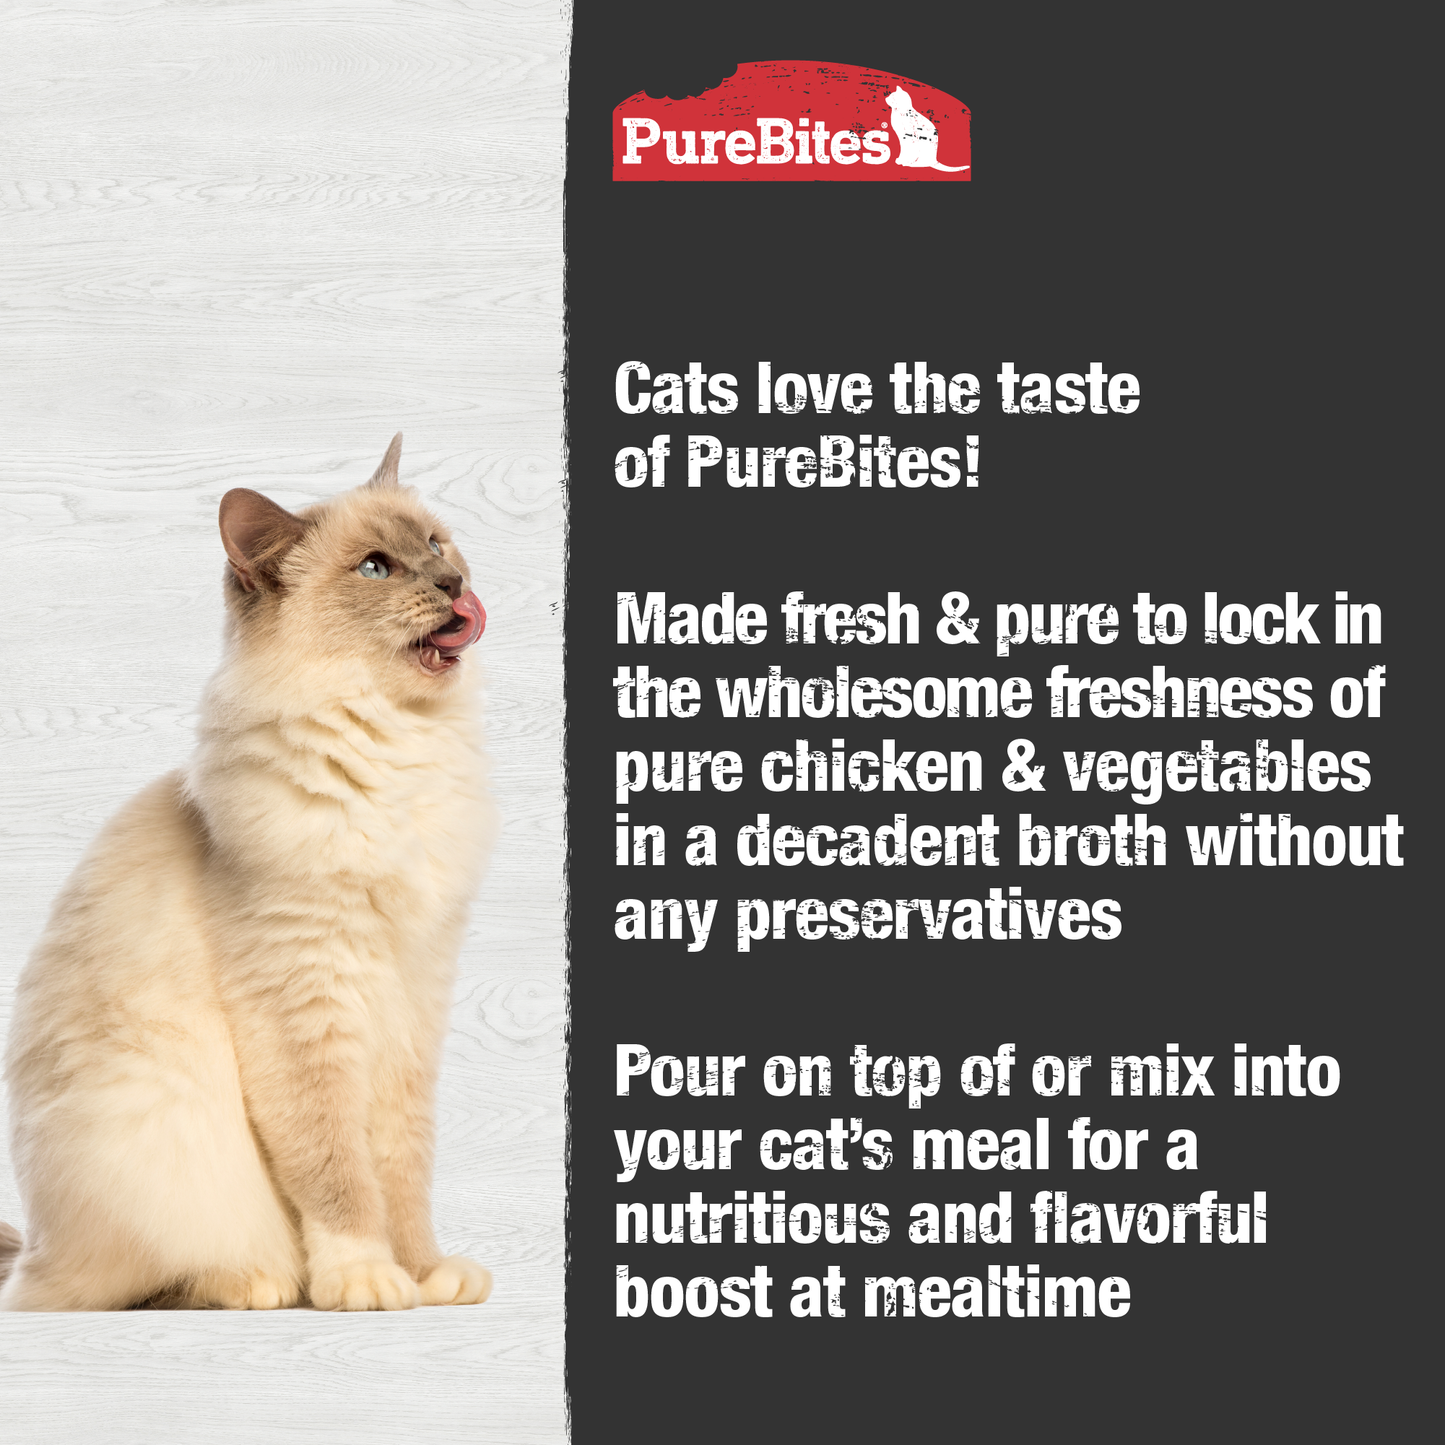 Made fresh & pure means more protein and nutrients packed into every pouch. With only chicken and vegetables in a rich broth, it provides superior nutrition and mirrors a cat's ancestral diet.